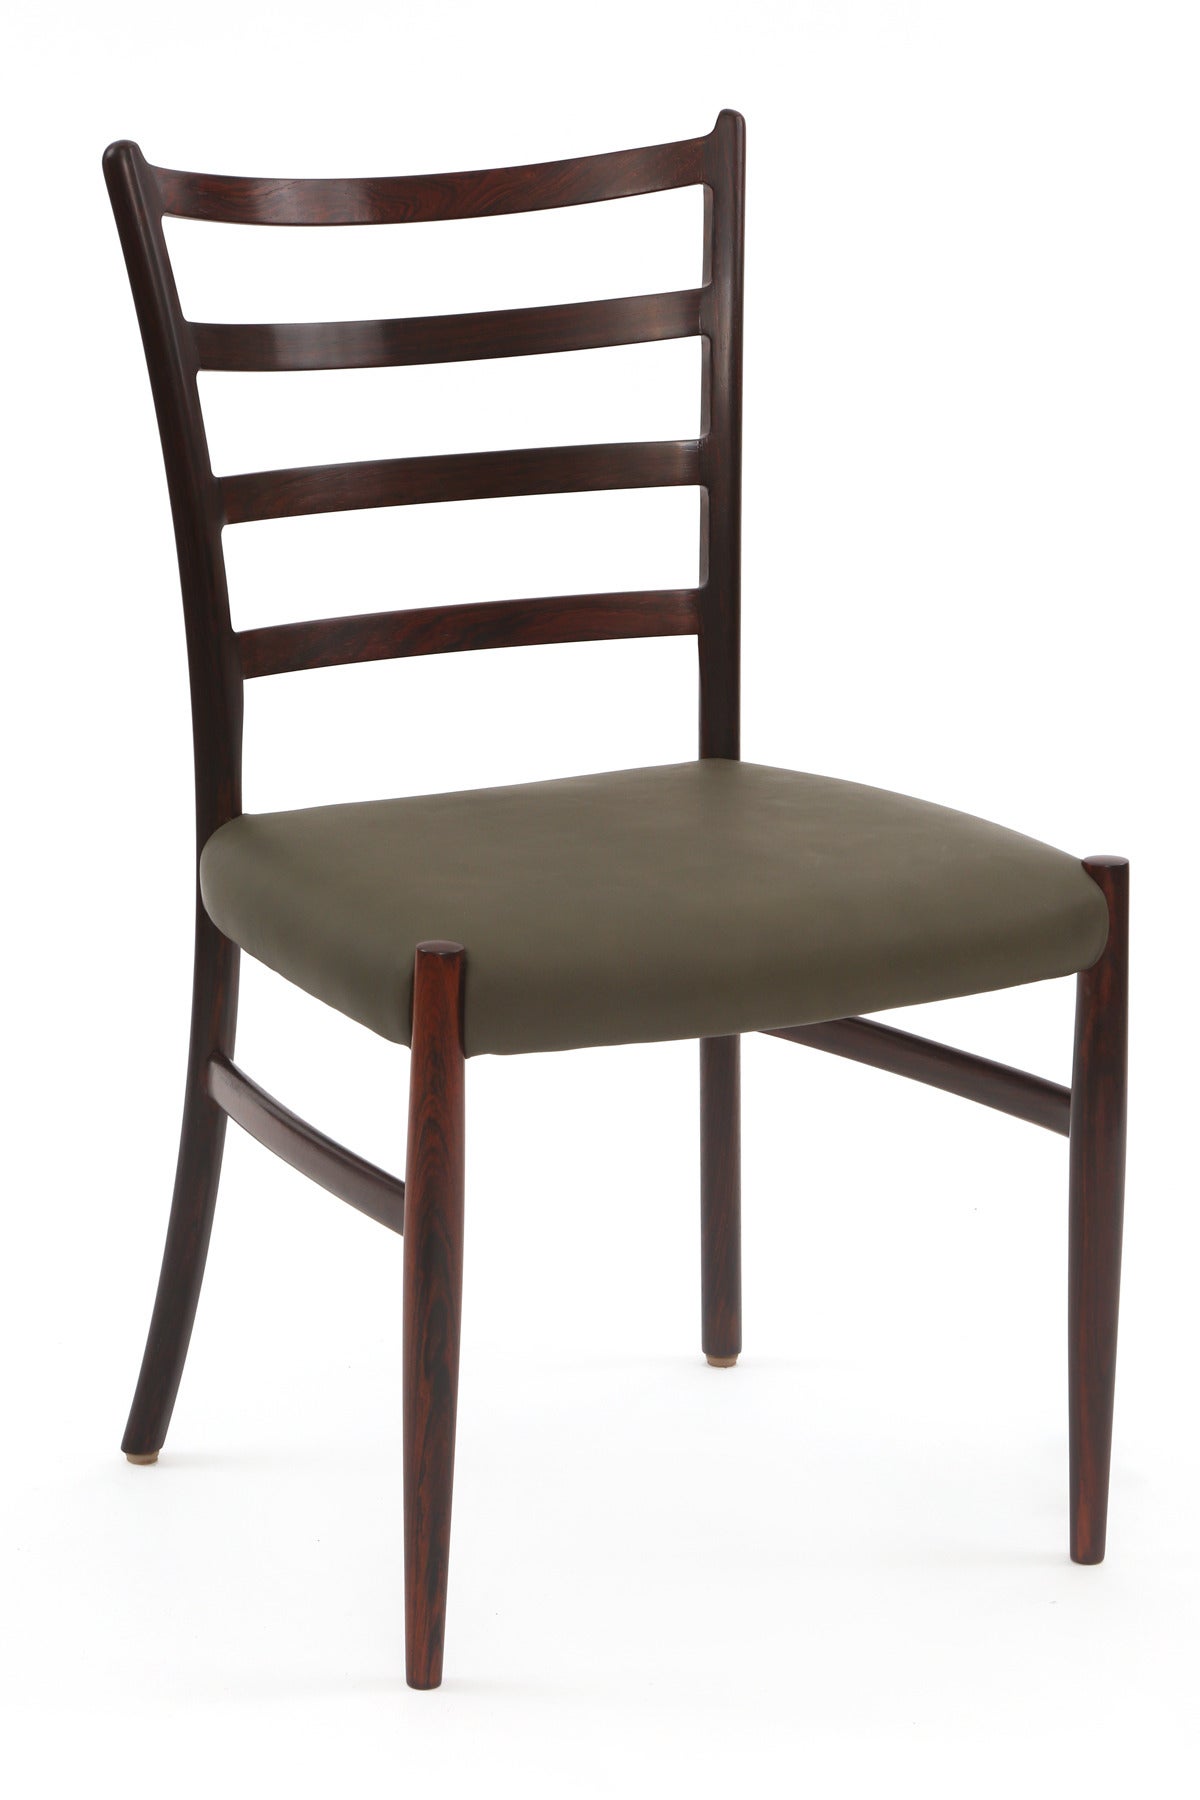 12 solid rosewood and leather dining chairs from Denmark, circa 1960. These examples are solid Brazilian rosewood with subtly curved slat backs. They have been newly upholstered in a stunning sage leather and have been impeccably finished. Price